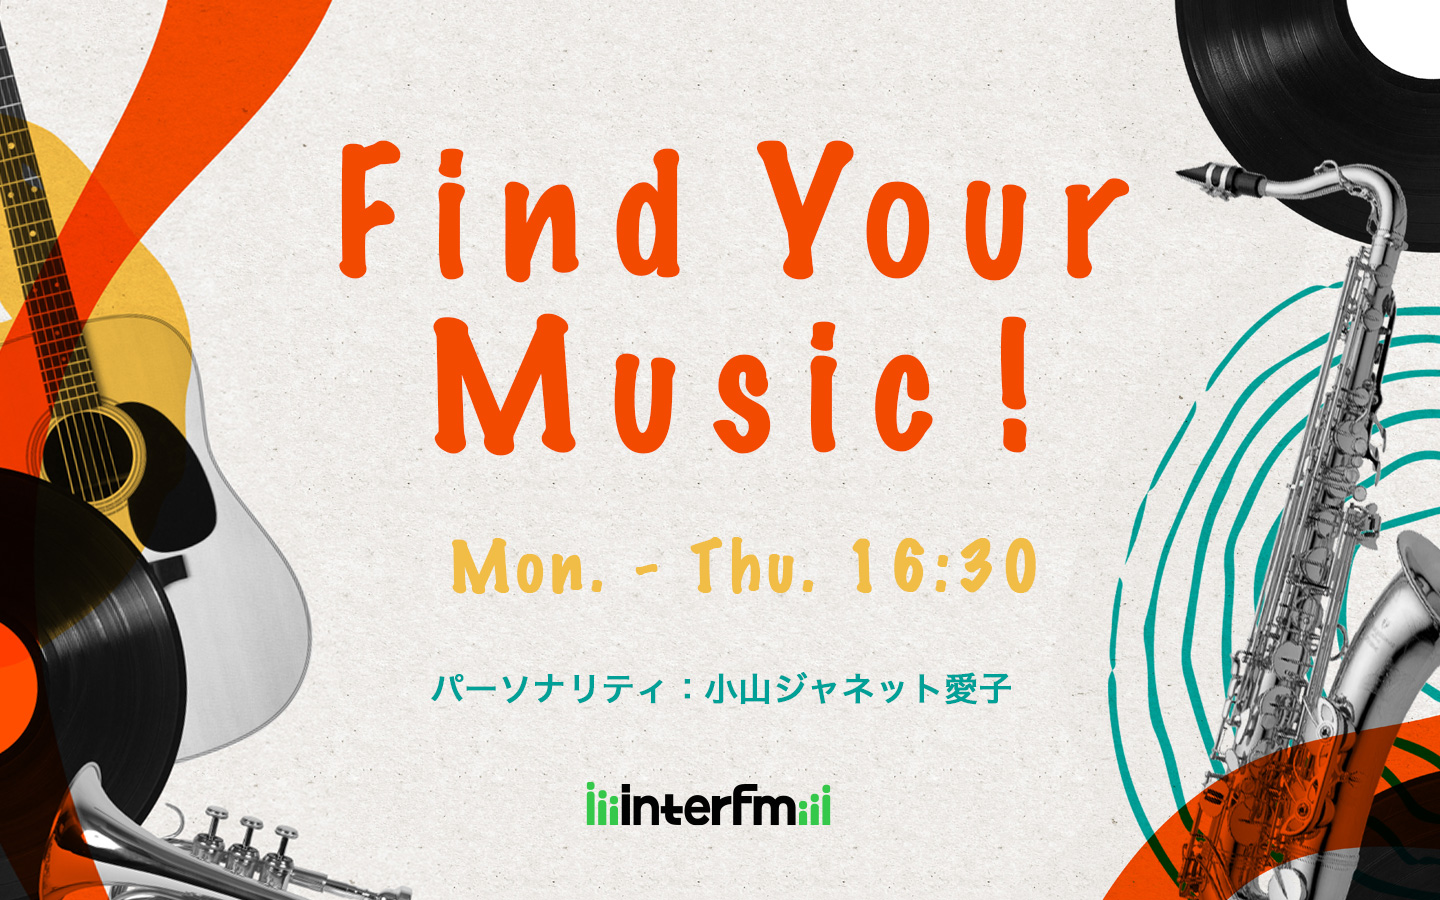 Find Your Music!